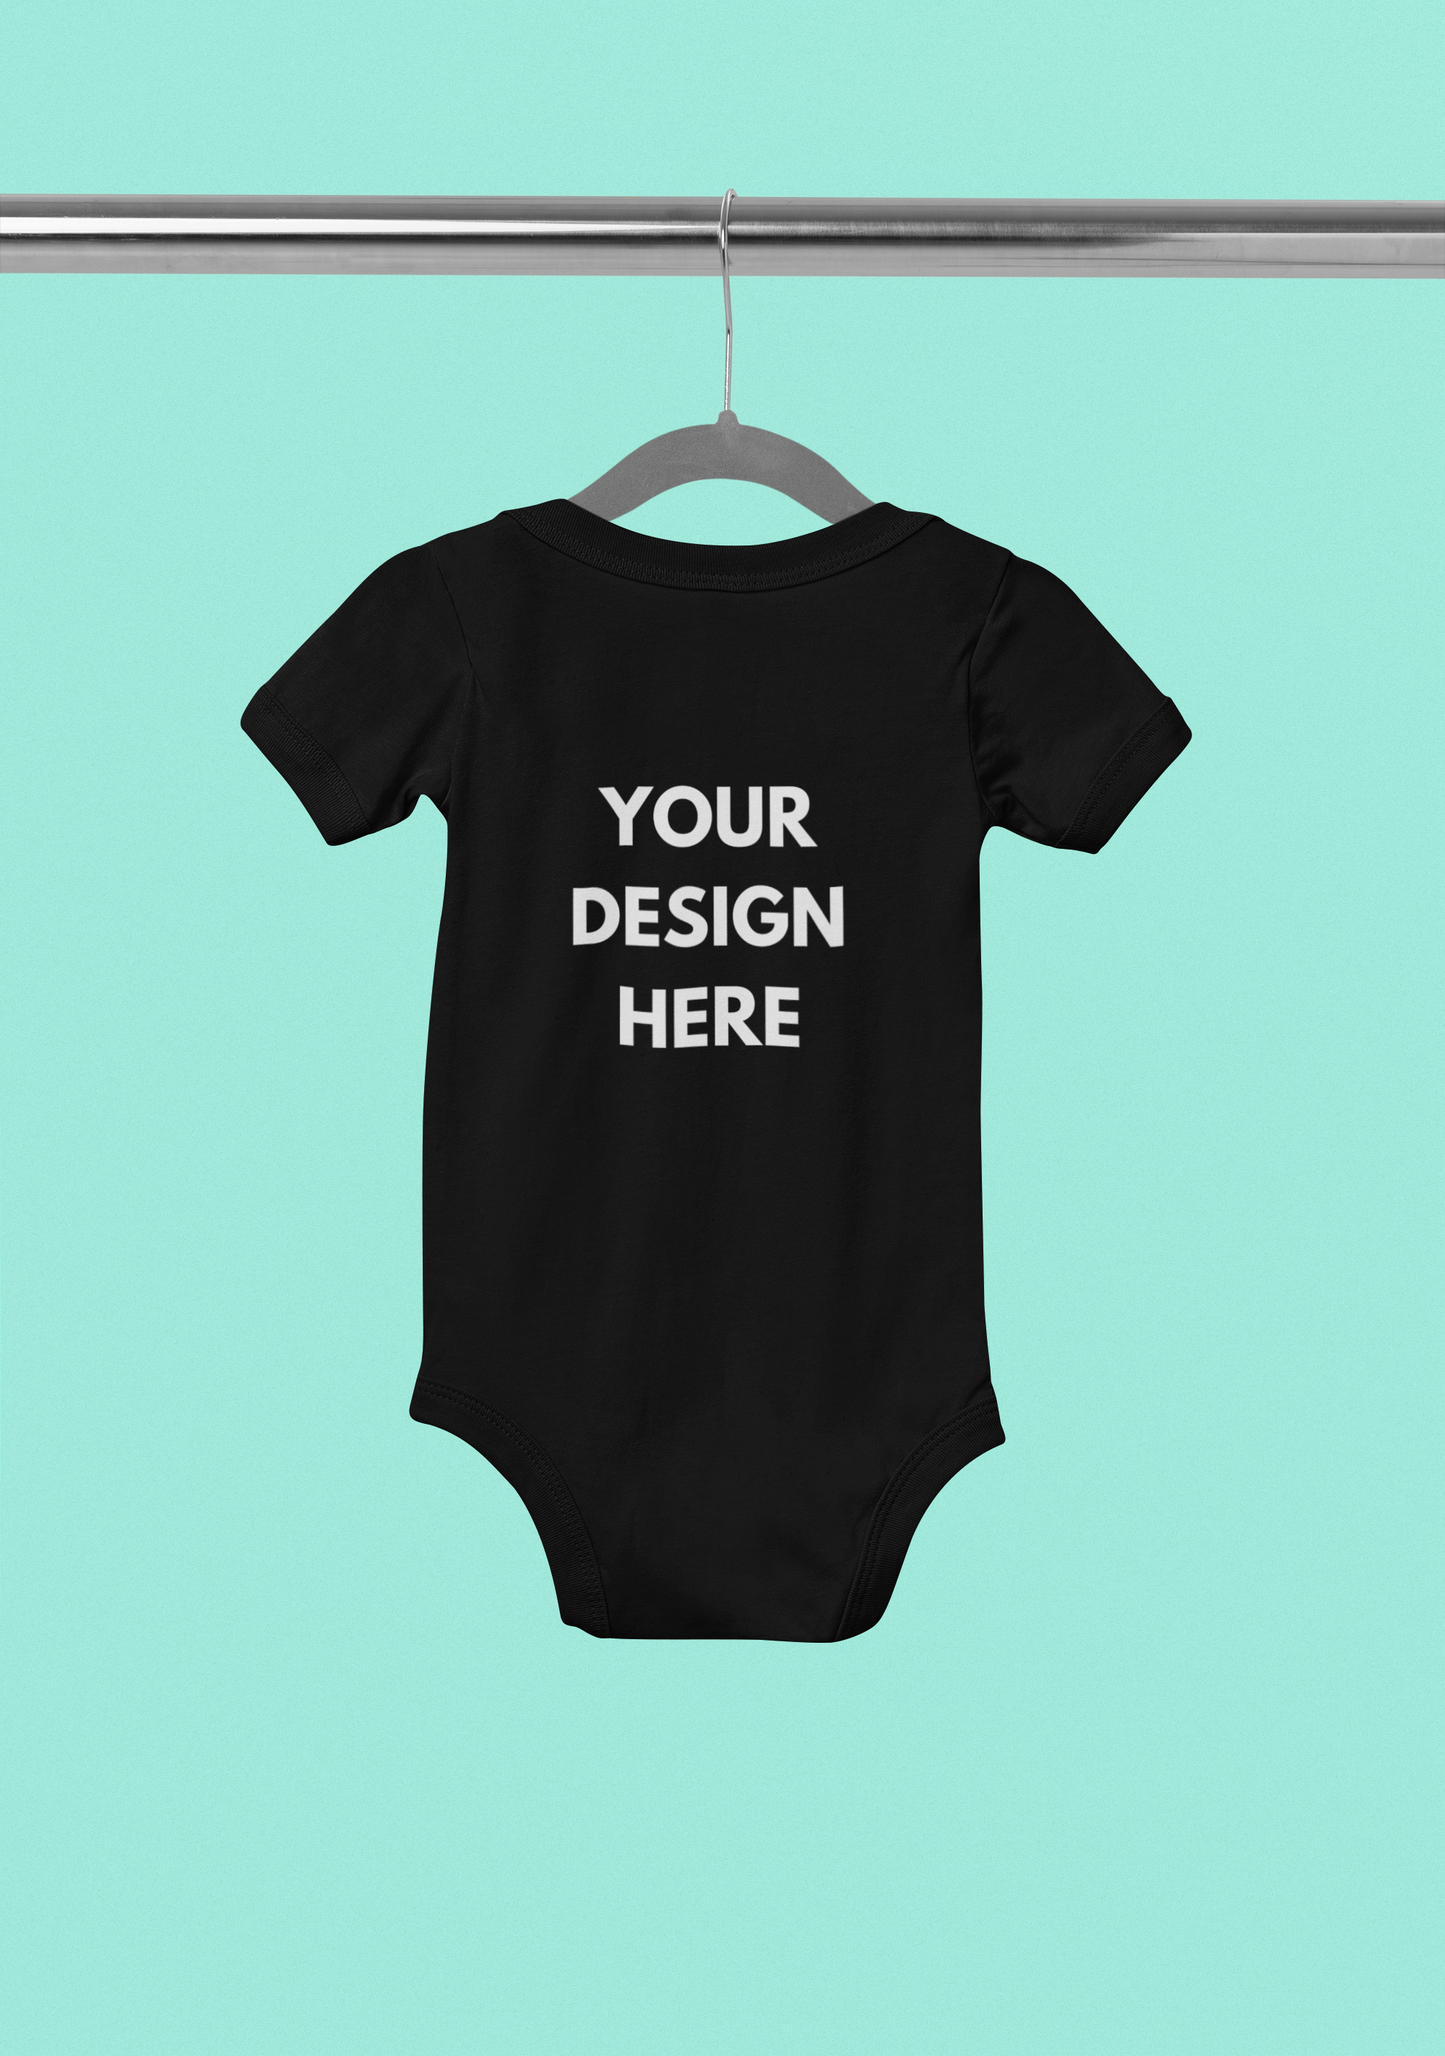 Create Your Own Baby Onsie - FRONT & BACK